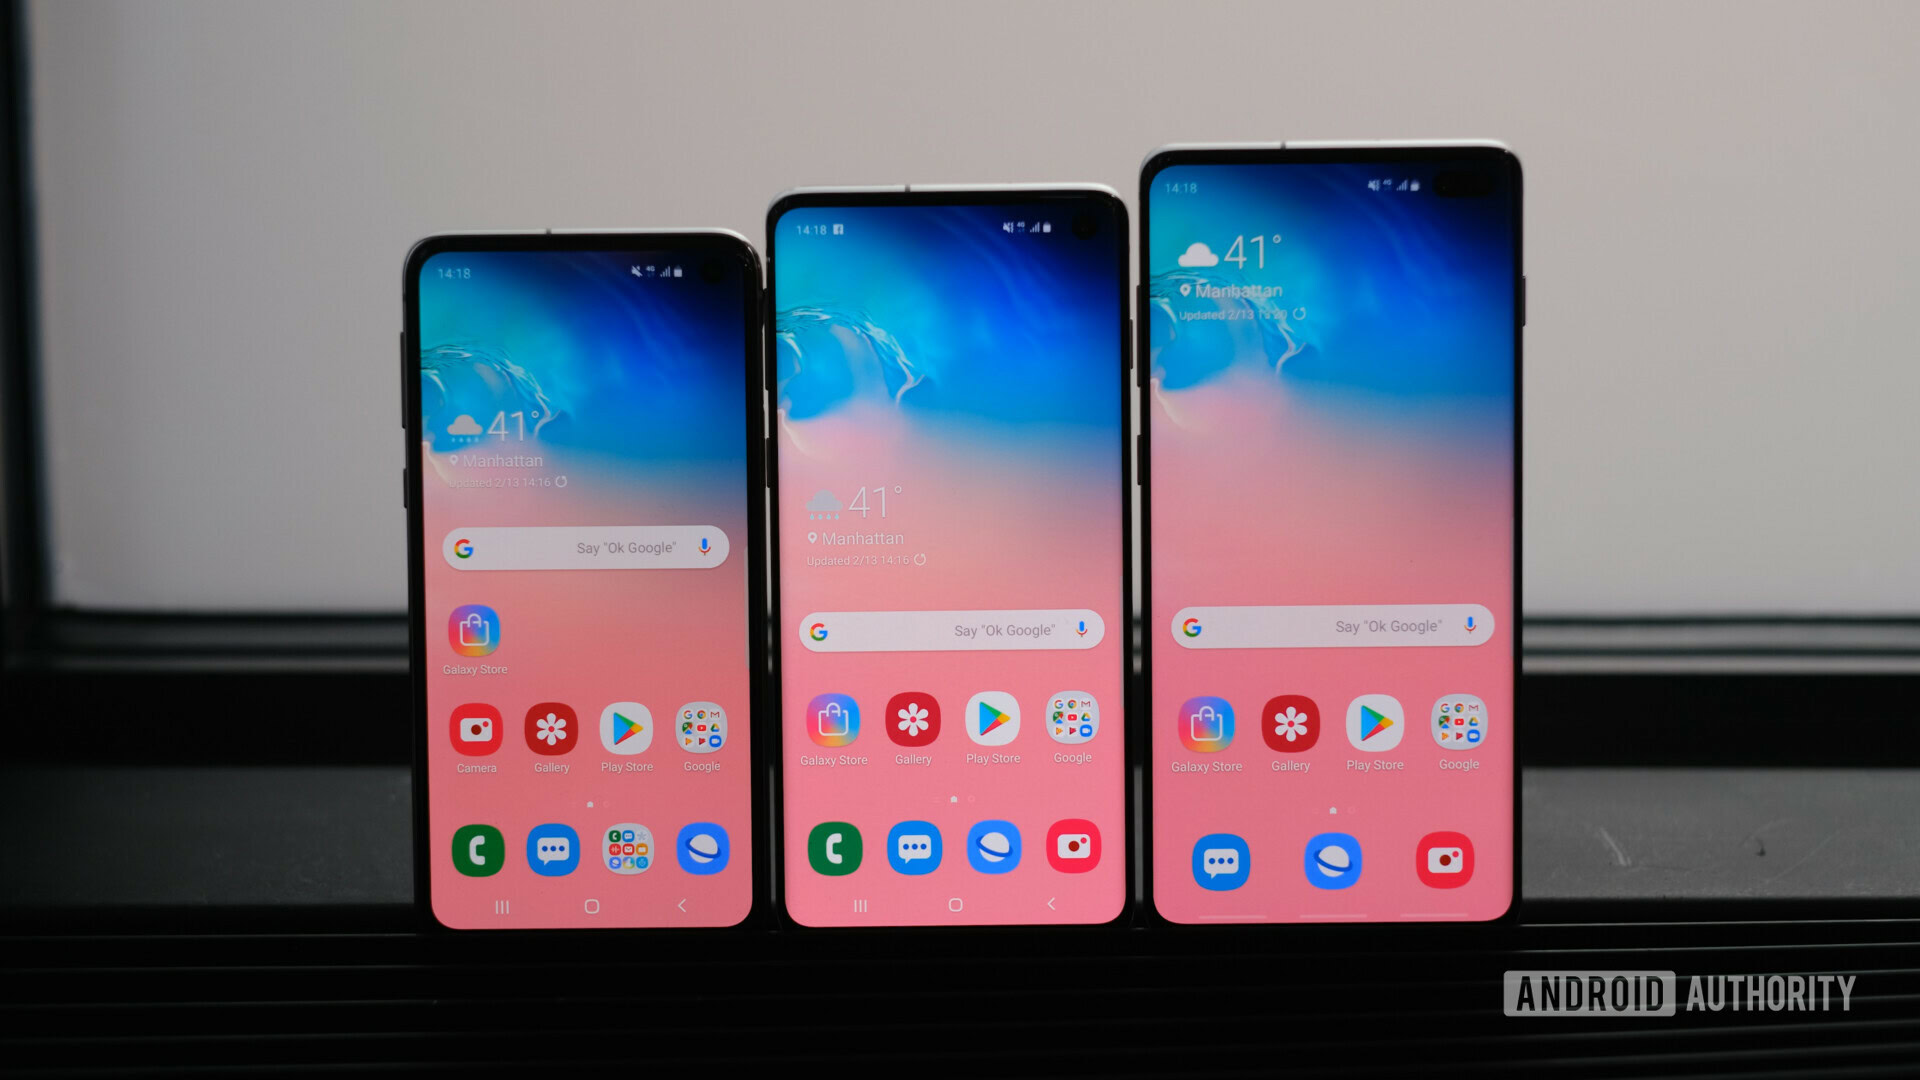 Samsung Galaxy S10: price, specs and release date